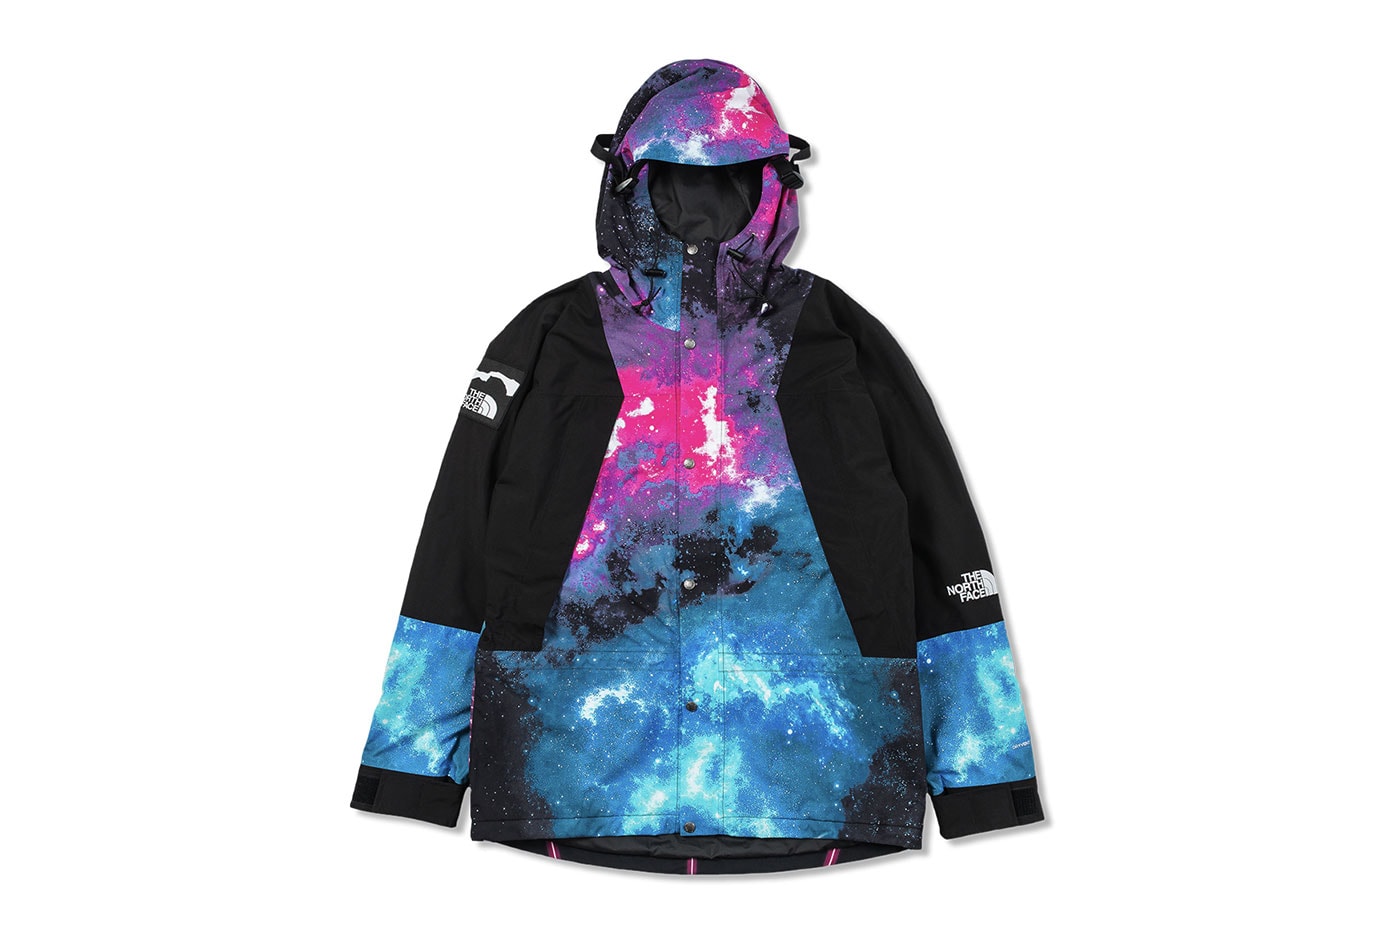 The Raffle Is Now Open For the INVINCIBLE x The North Face “METAVERSE EXPLORER” Capsule